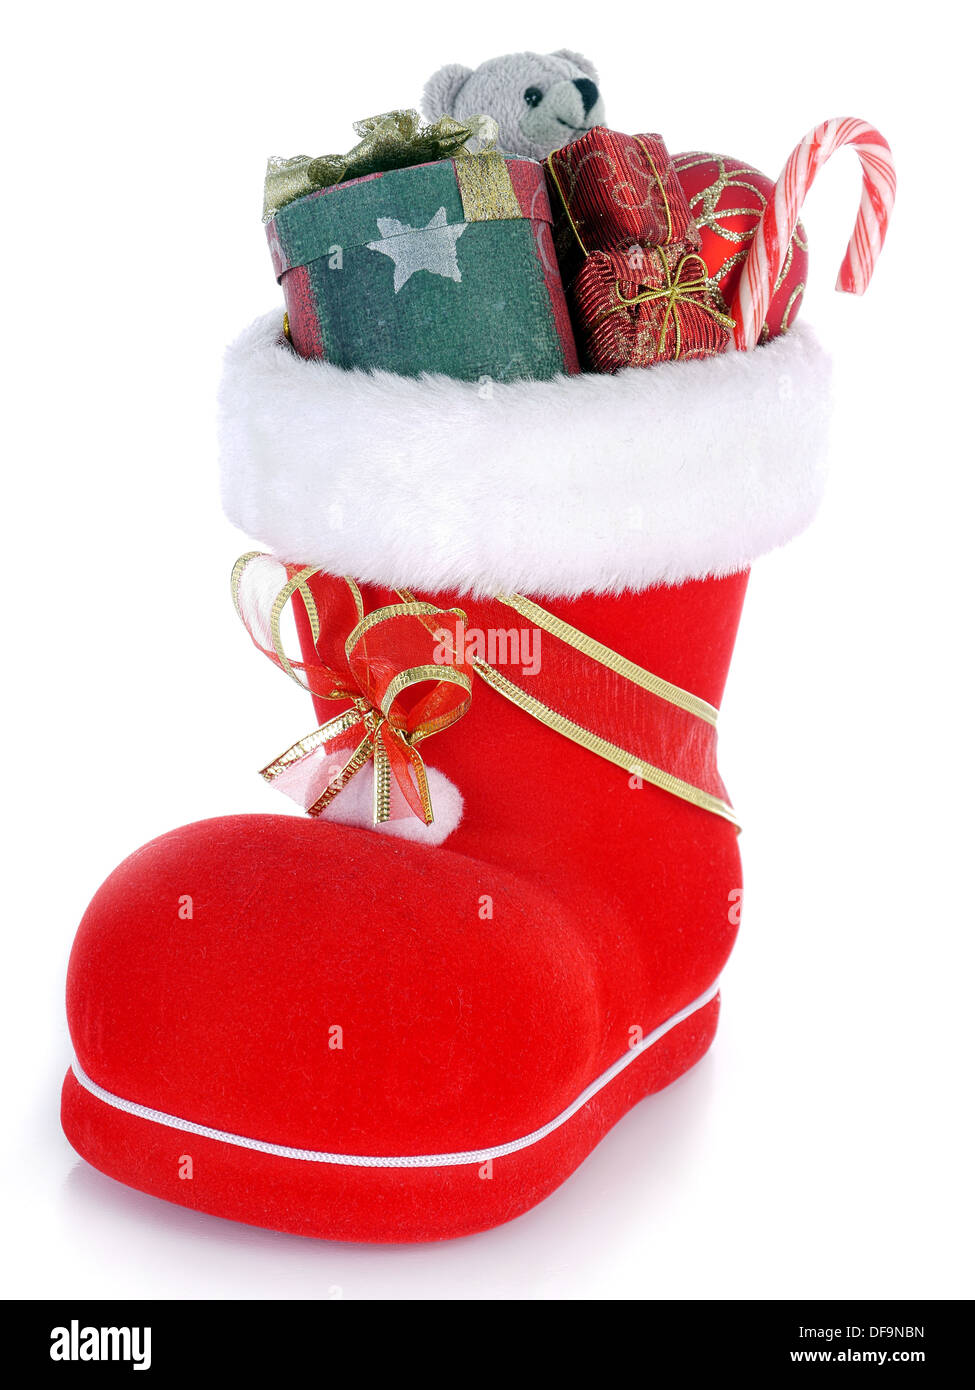 Red Santa's shoe stuffed with Christmas presents over white background Stock Photo